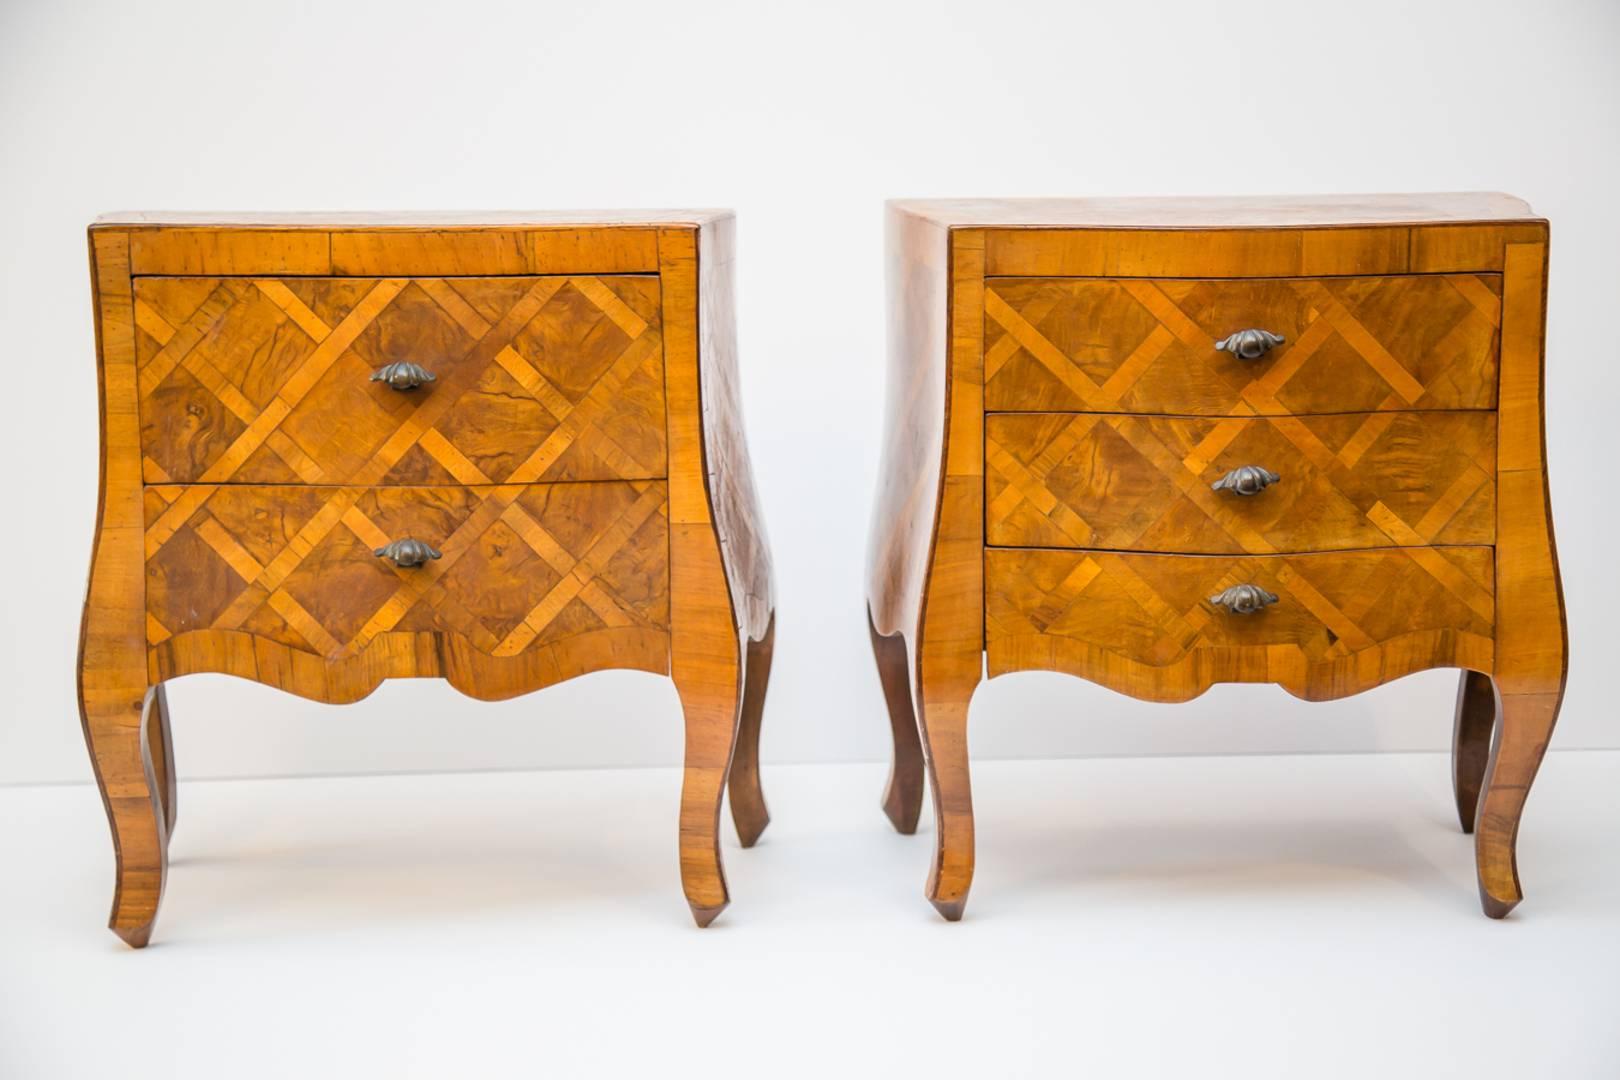 Pair of Parquetry Bombay Petite Chests in Italian Figured Walnut. Very unusual size.  Pair not identical.  Circa 1940's